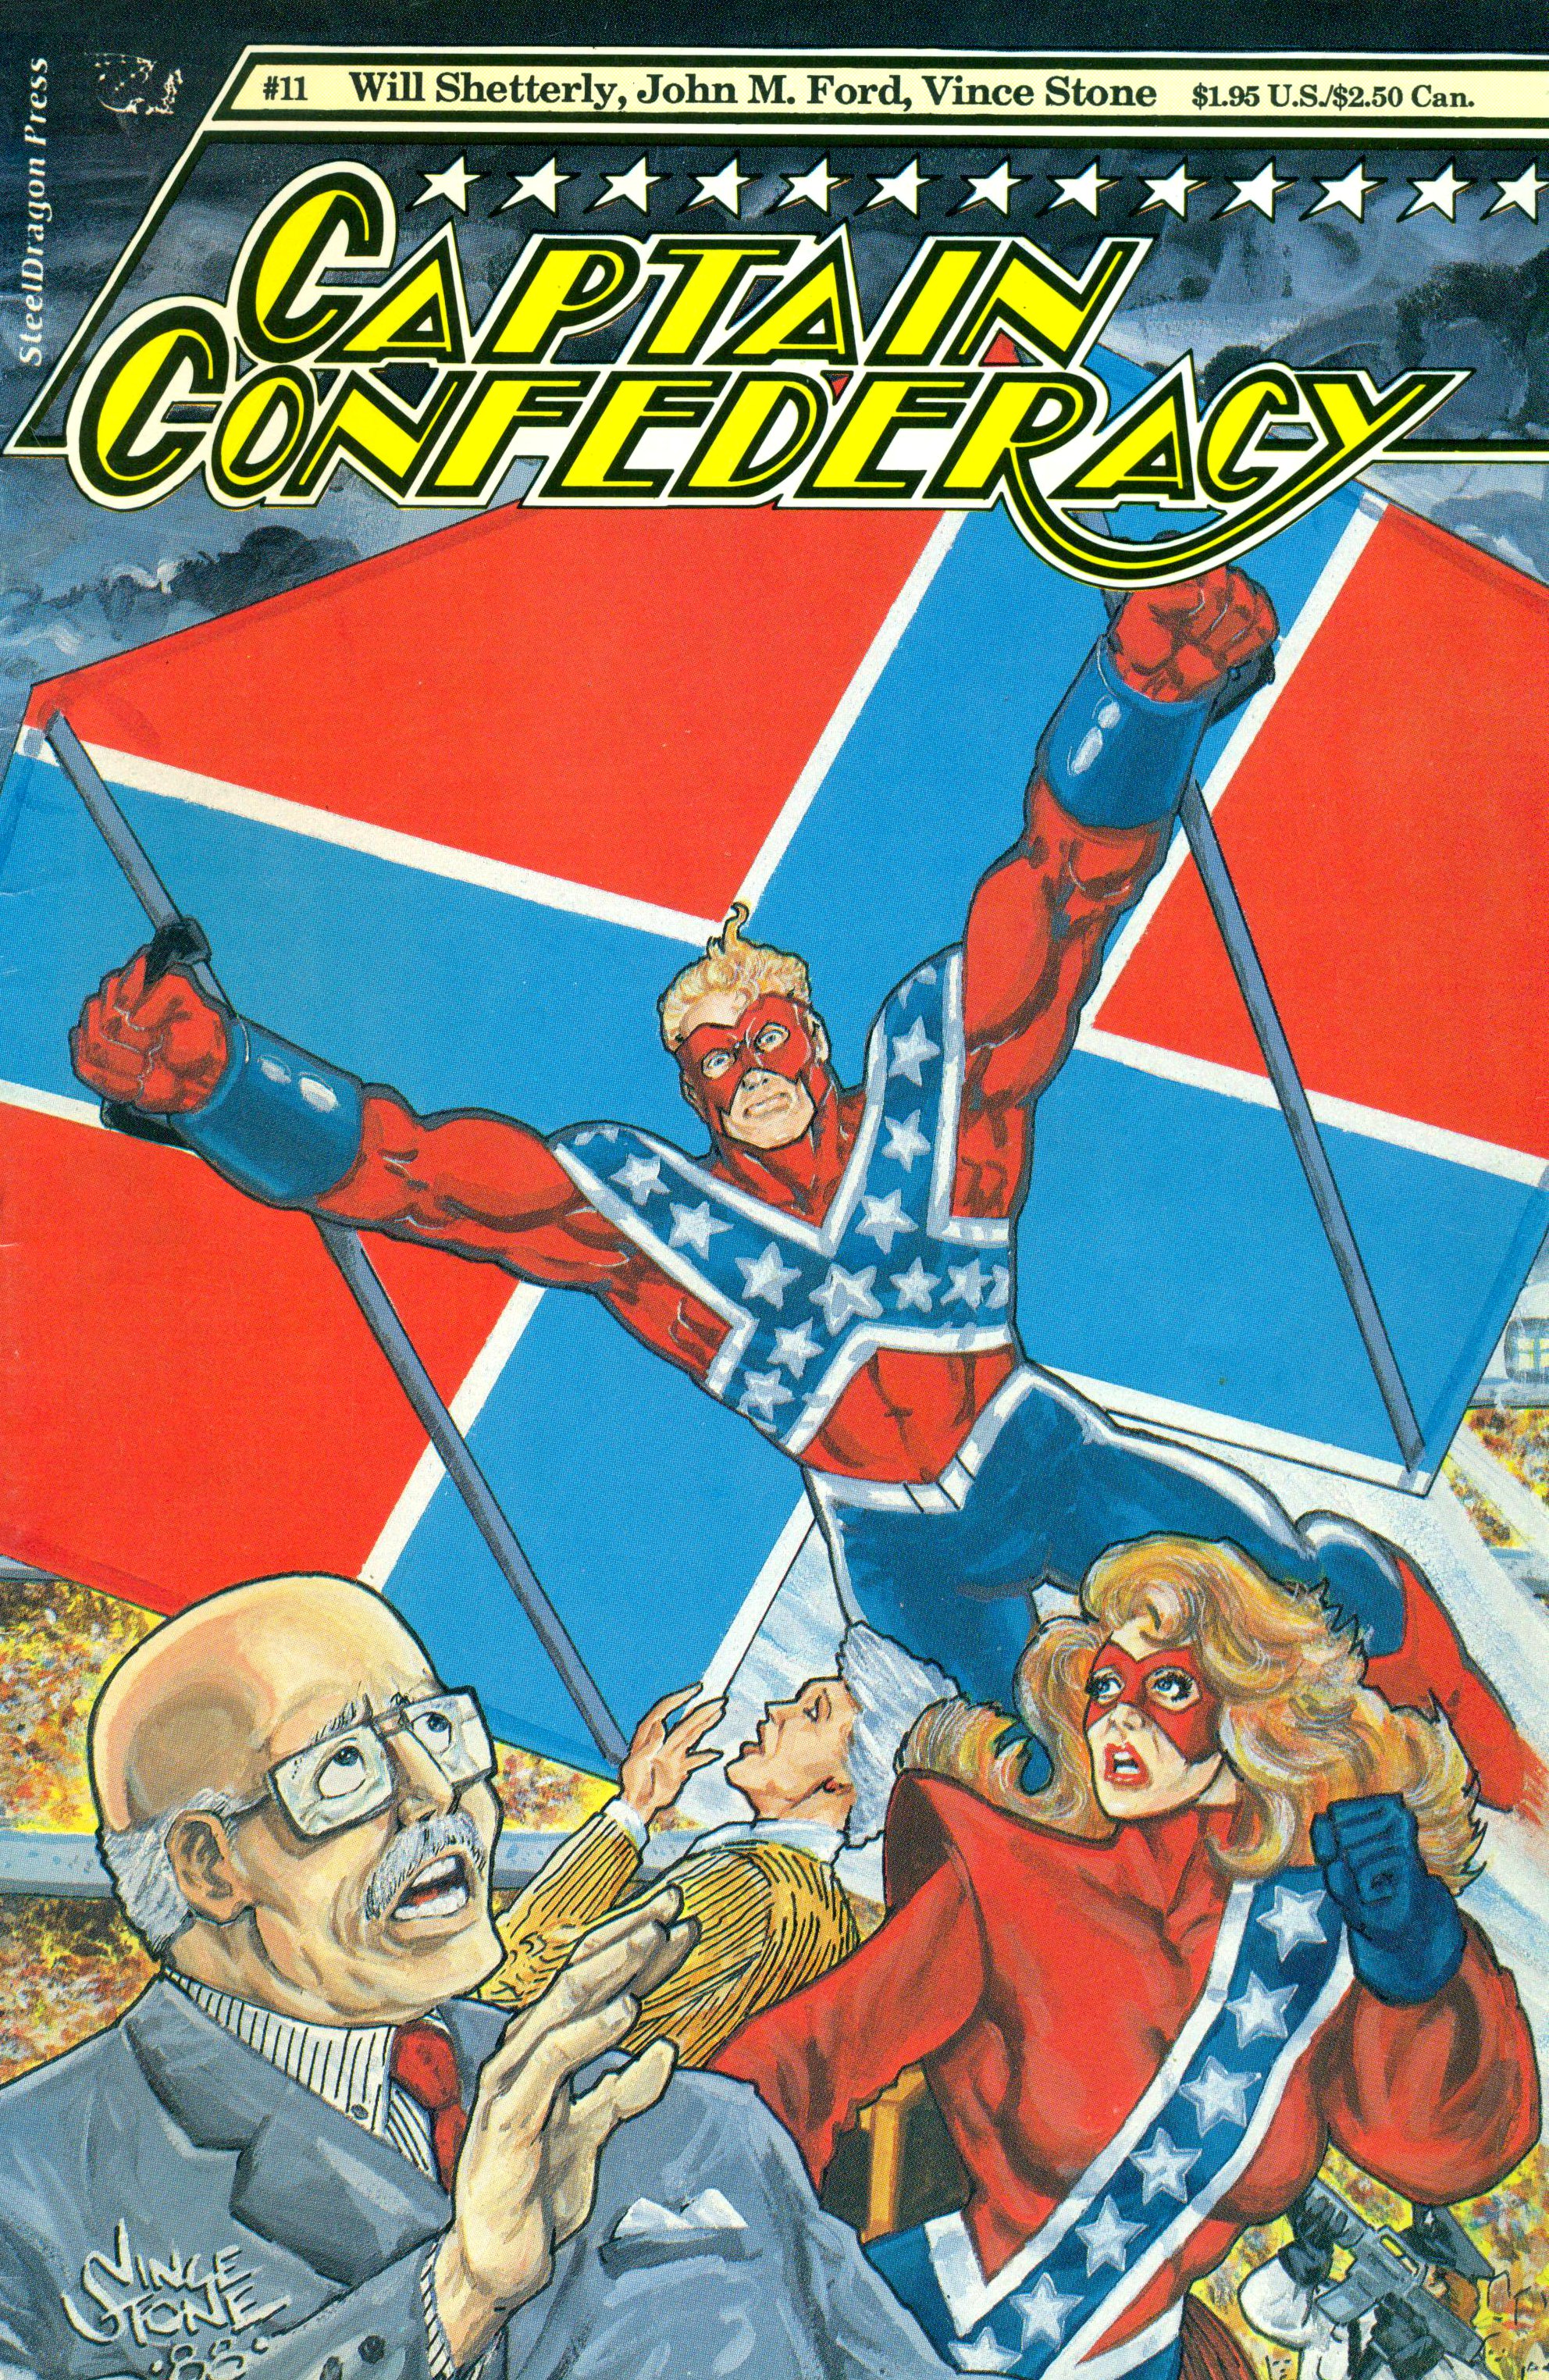 Read online Captain Confederacy (1986) comic -  Issue #11 - 1